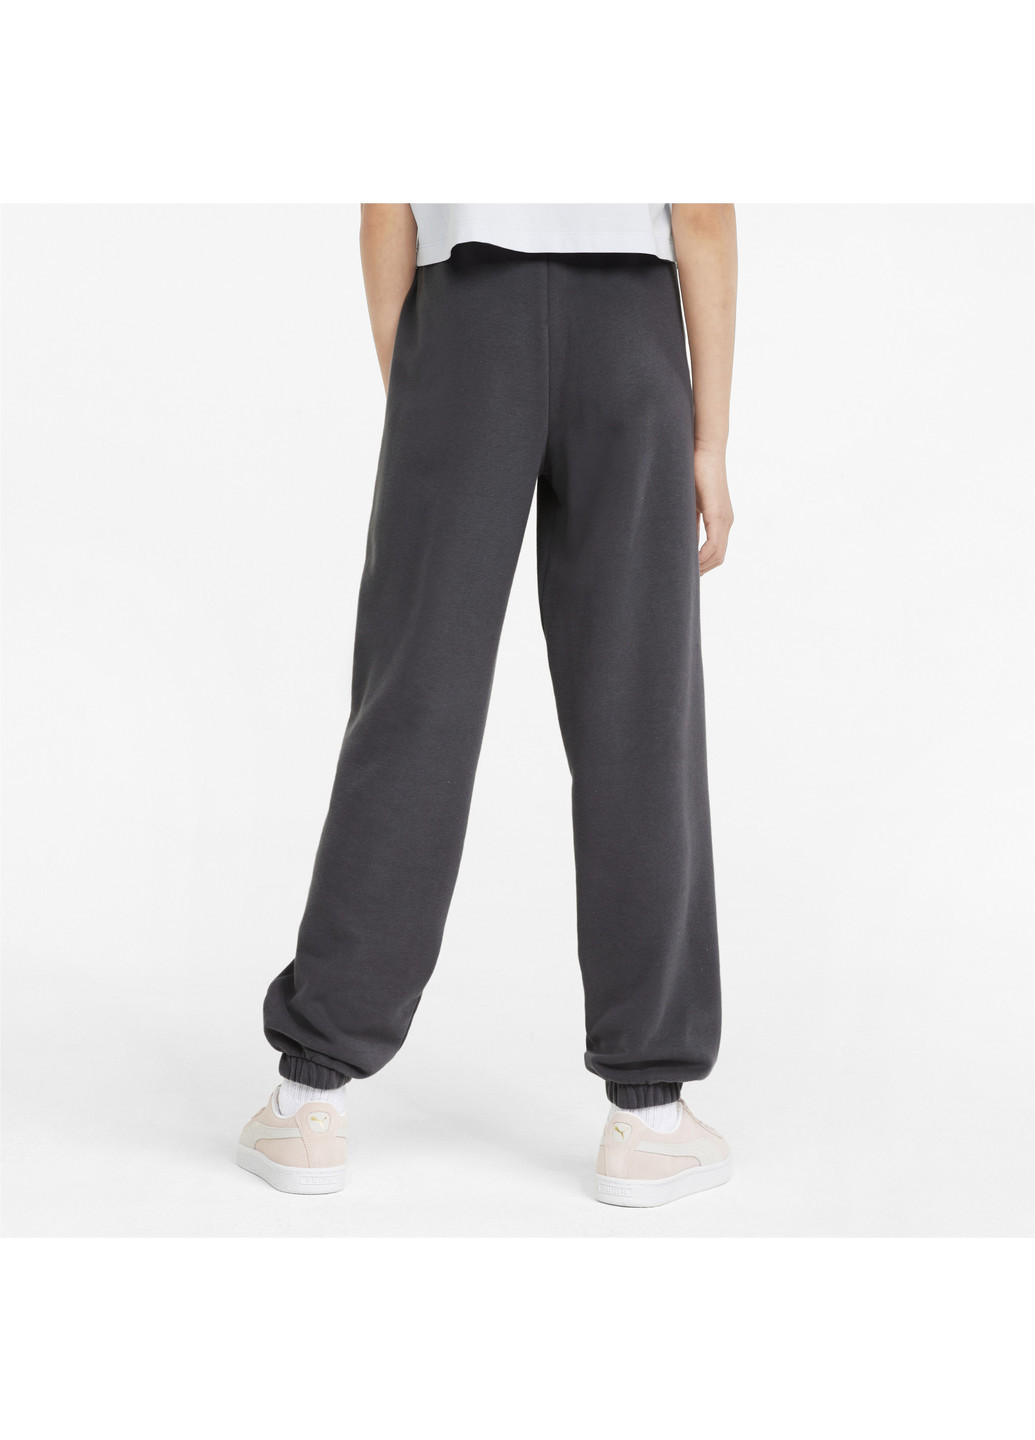 Дитячі штани GRL Relaxed Fit Youth Sweatpants Puma (252881138)